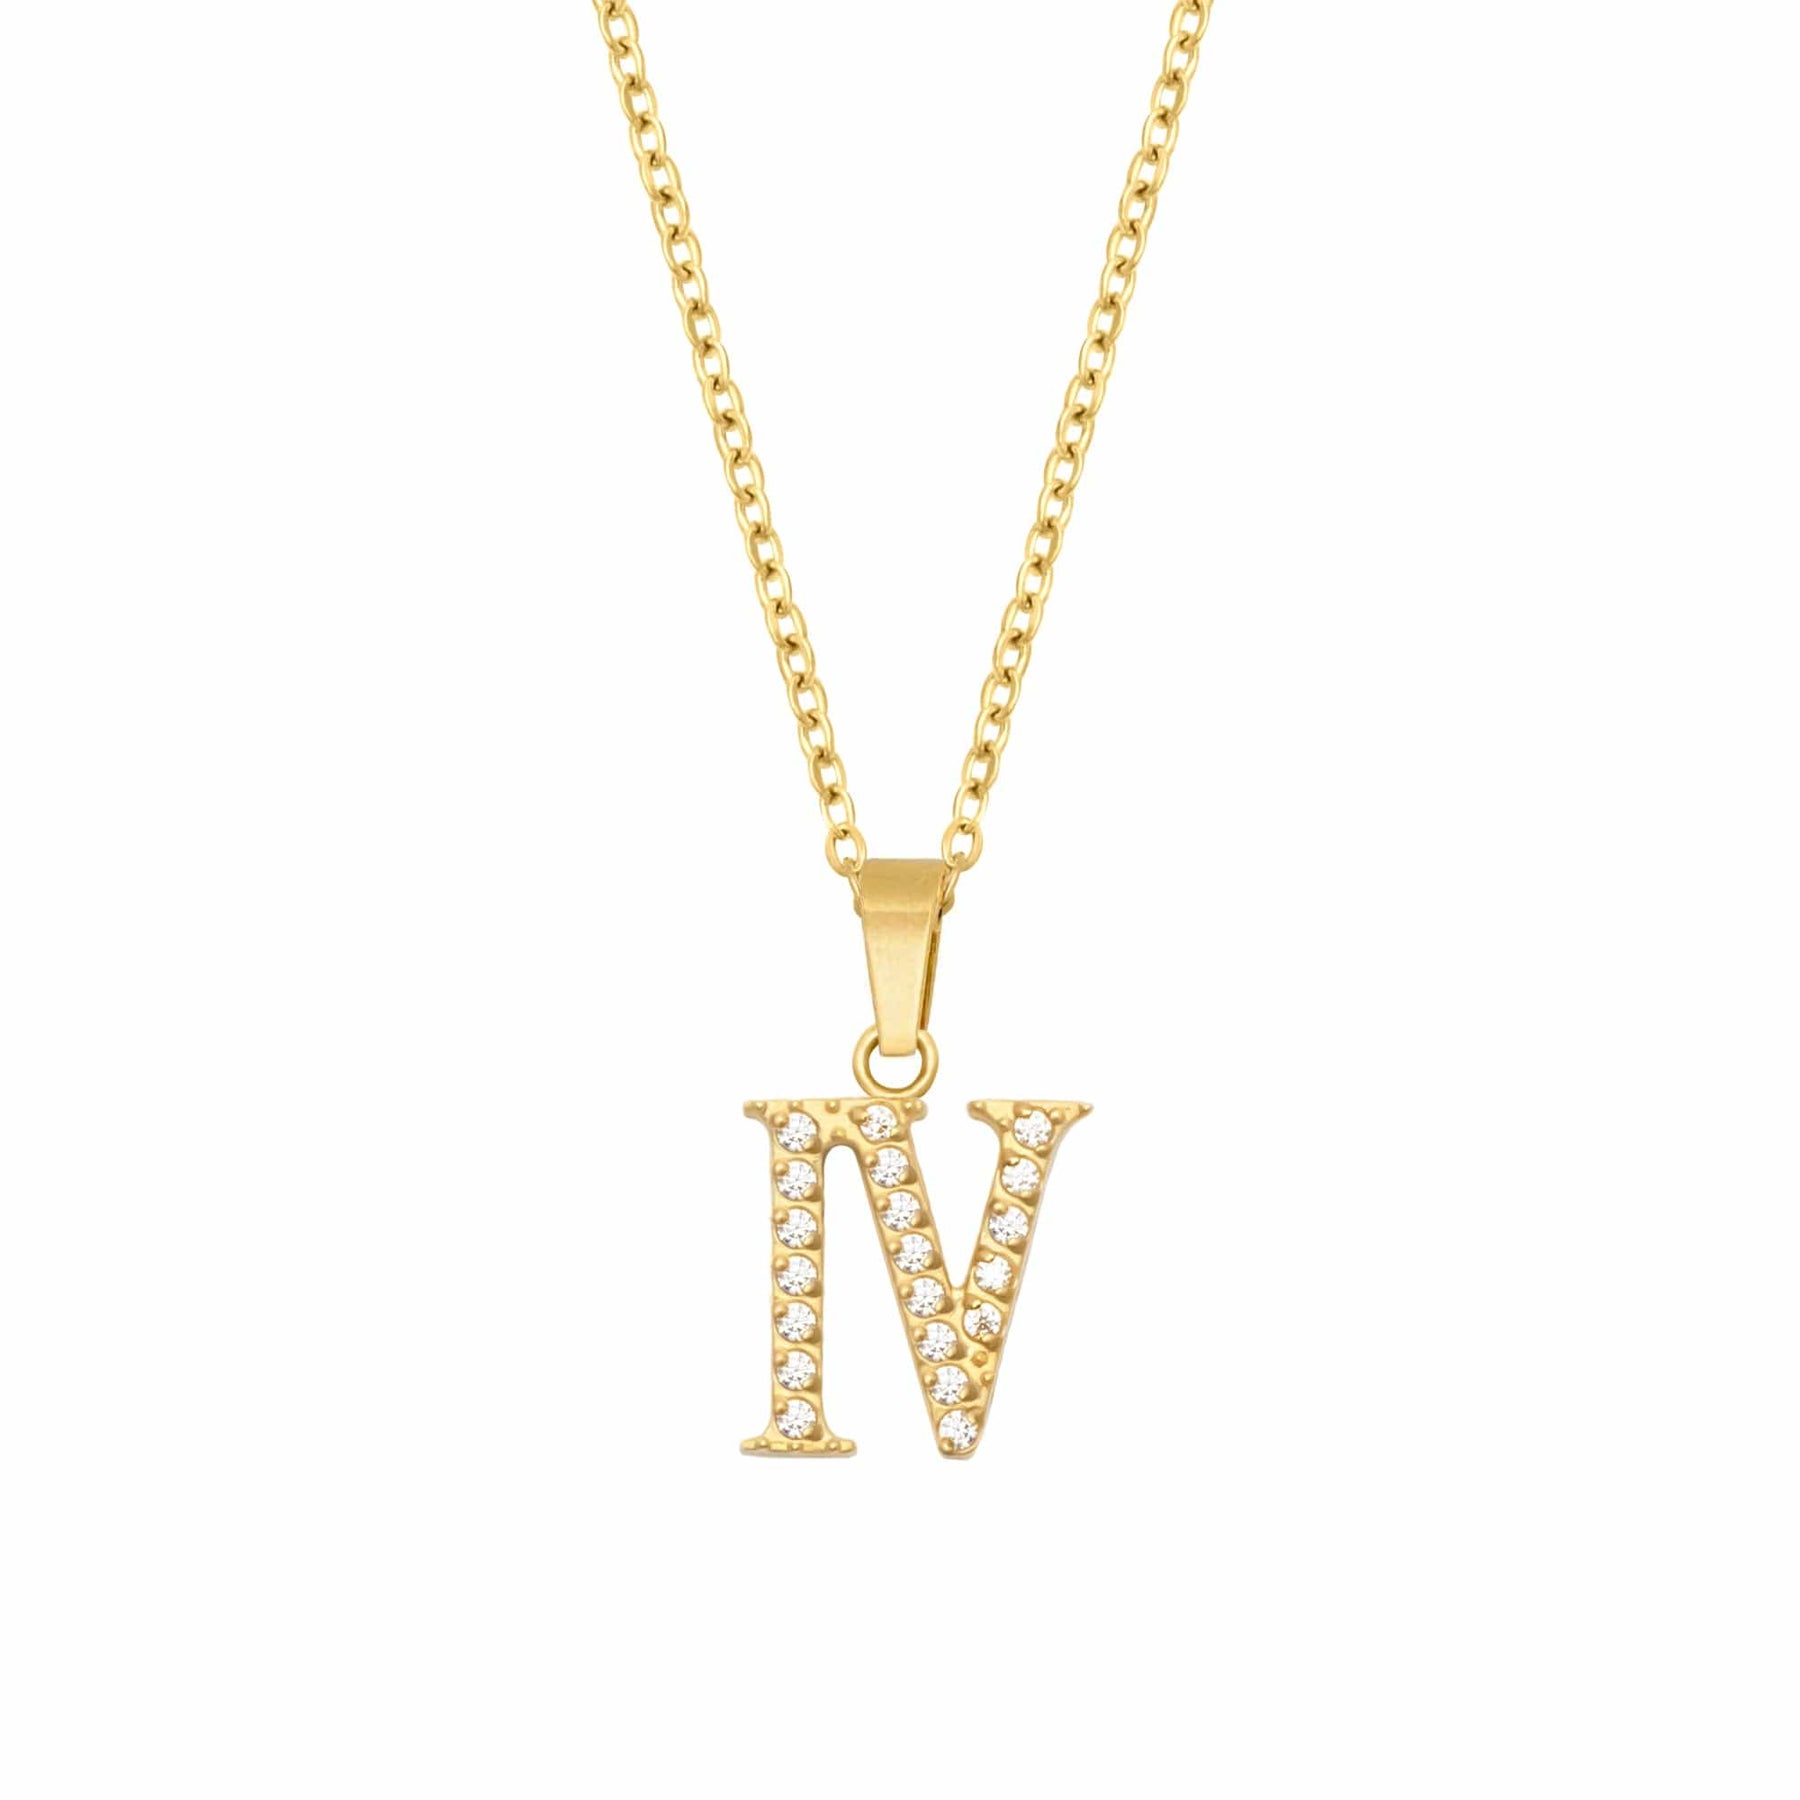 BohoMoon Stainless Steel Roman Numerals Necklace Gold / IV